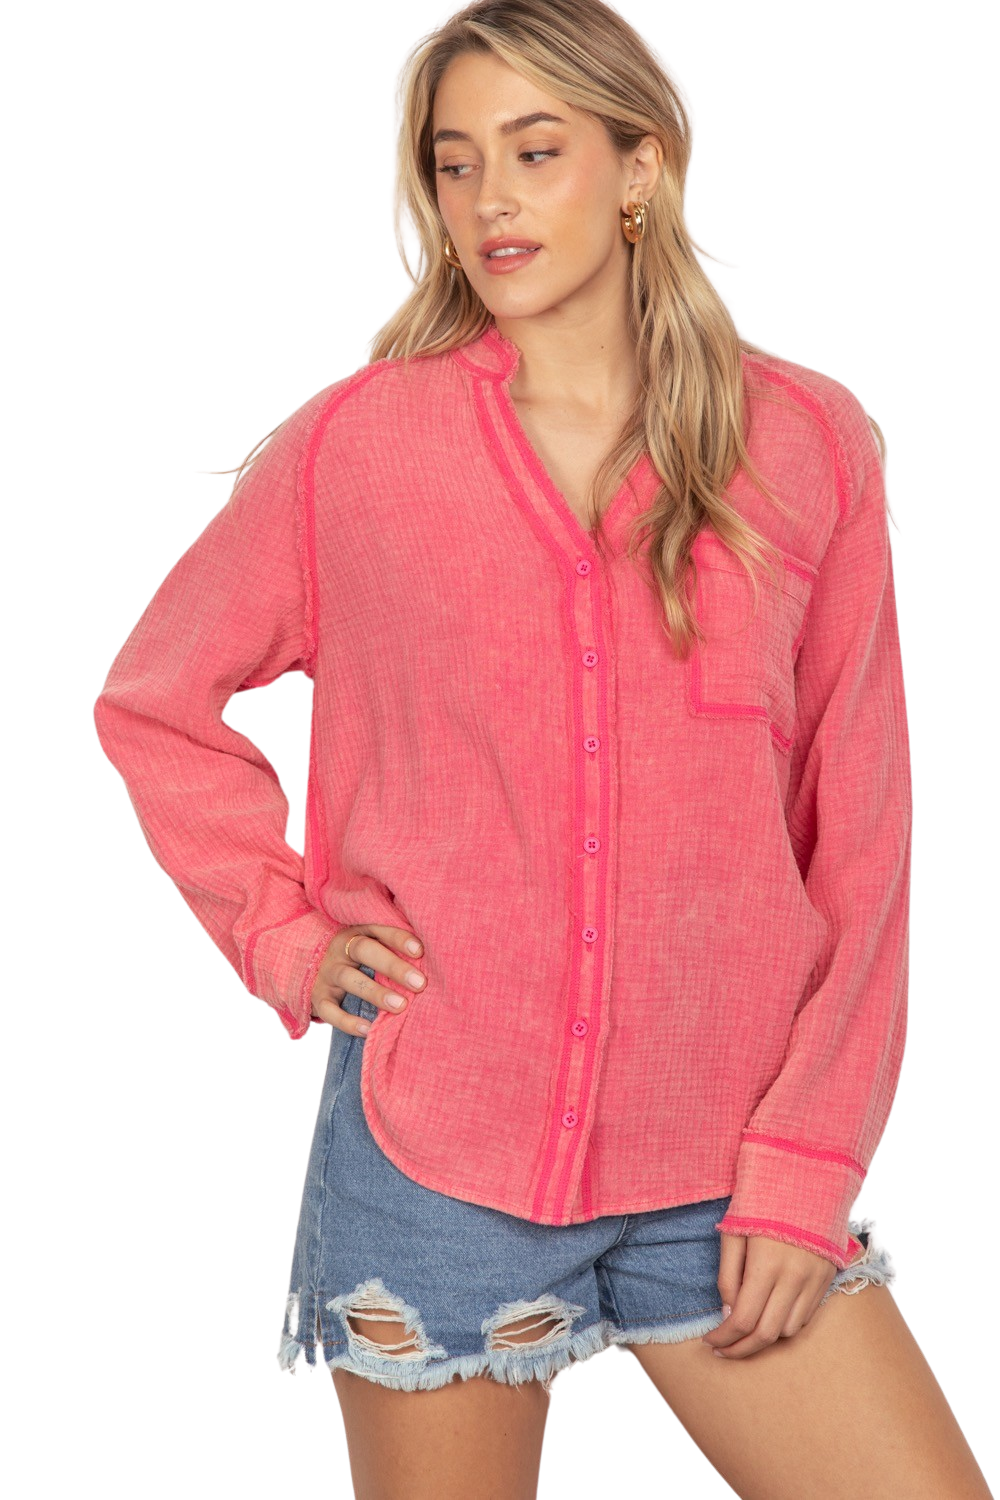 Beach Dreamer Washed Out Pink Guaze Top